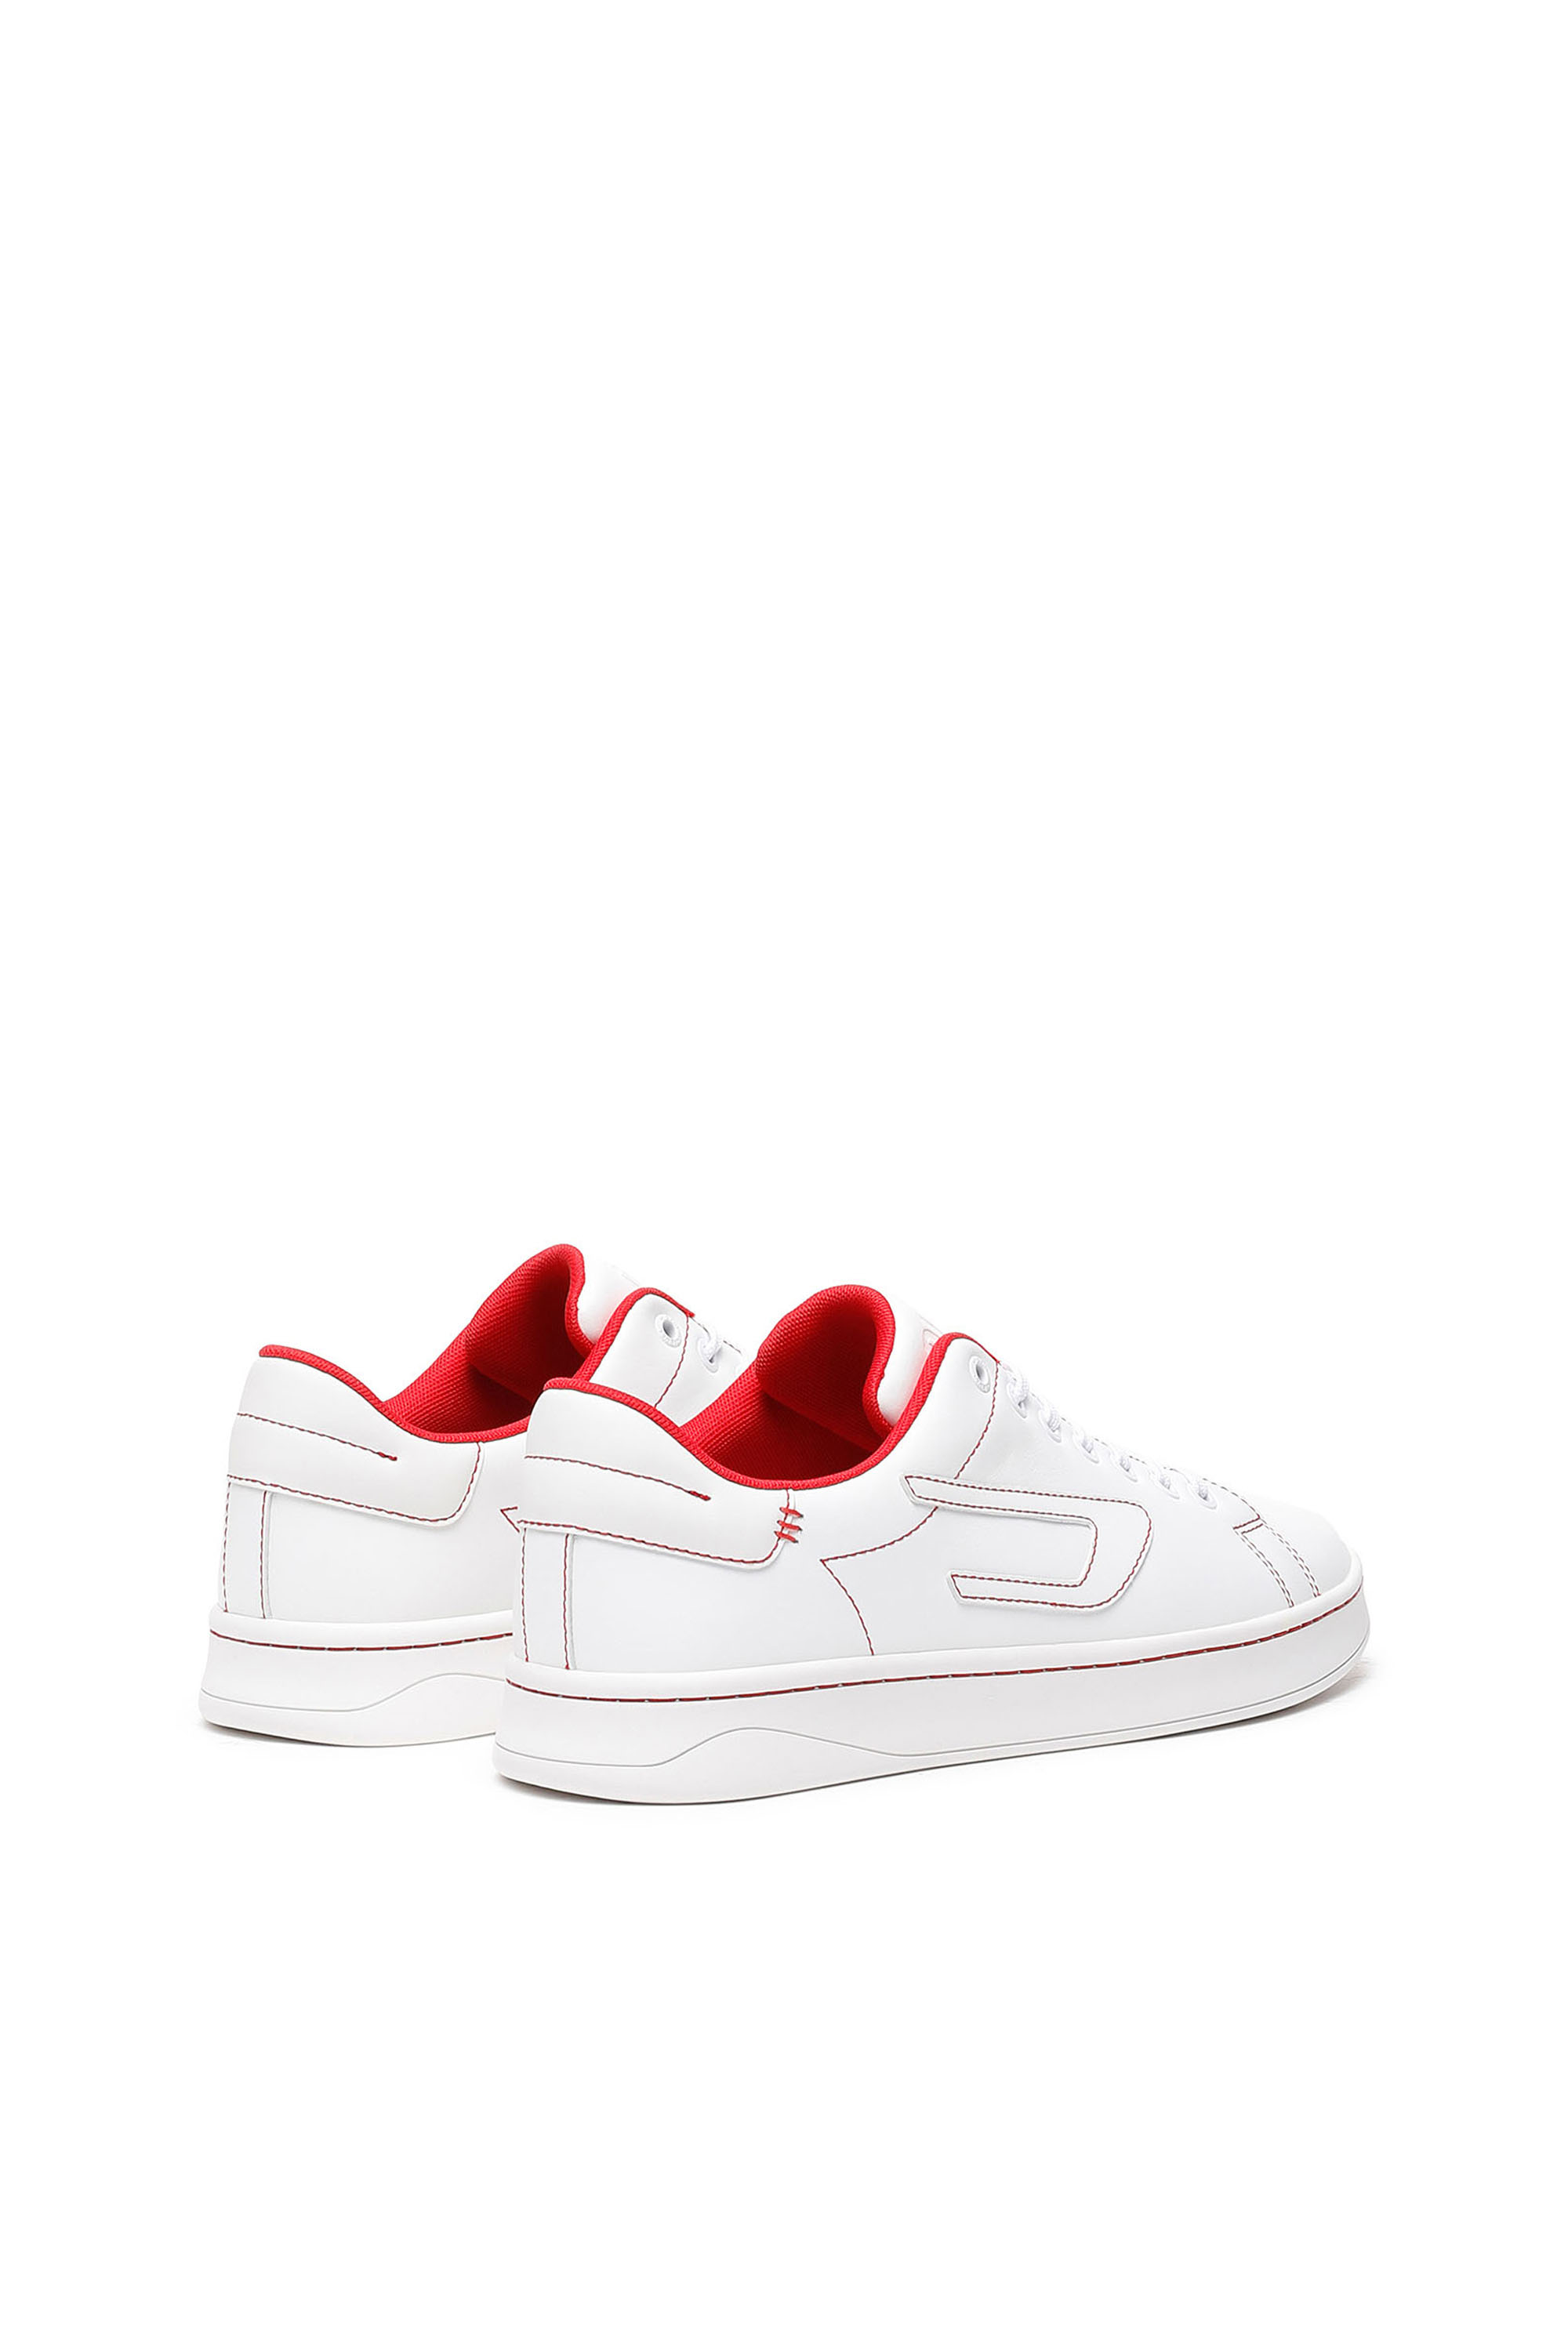 Diesel - S-ATHENE LOW, Man S-Athene Low - Sneakers with contrast stitching in Multicolor - Image 3